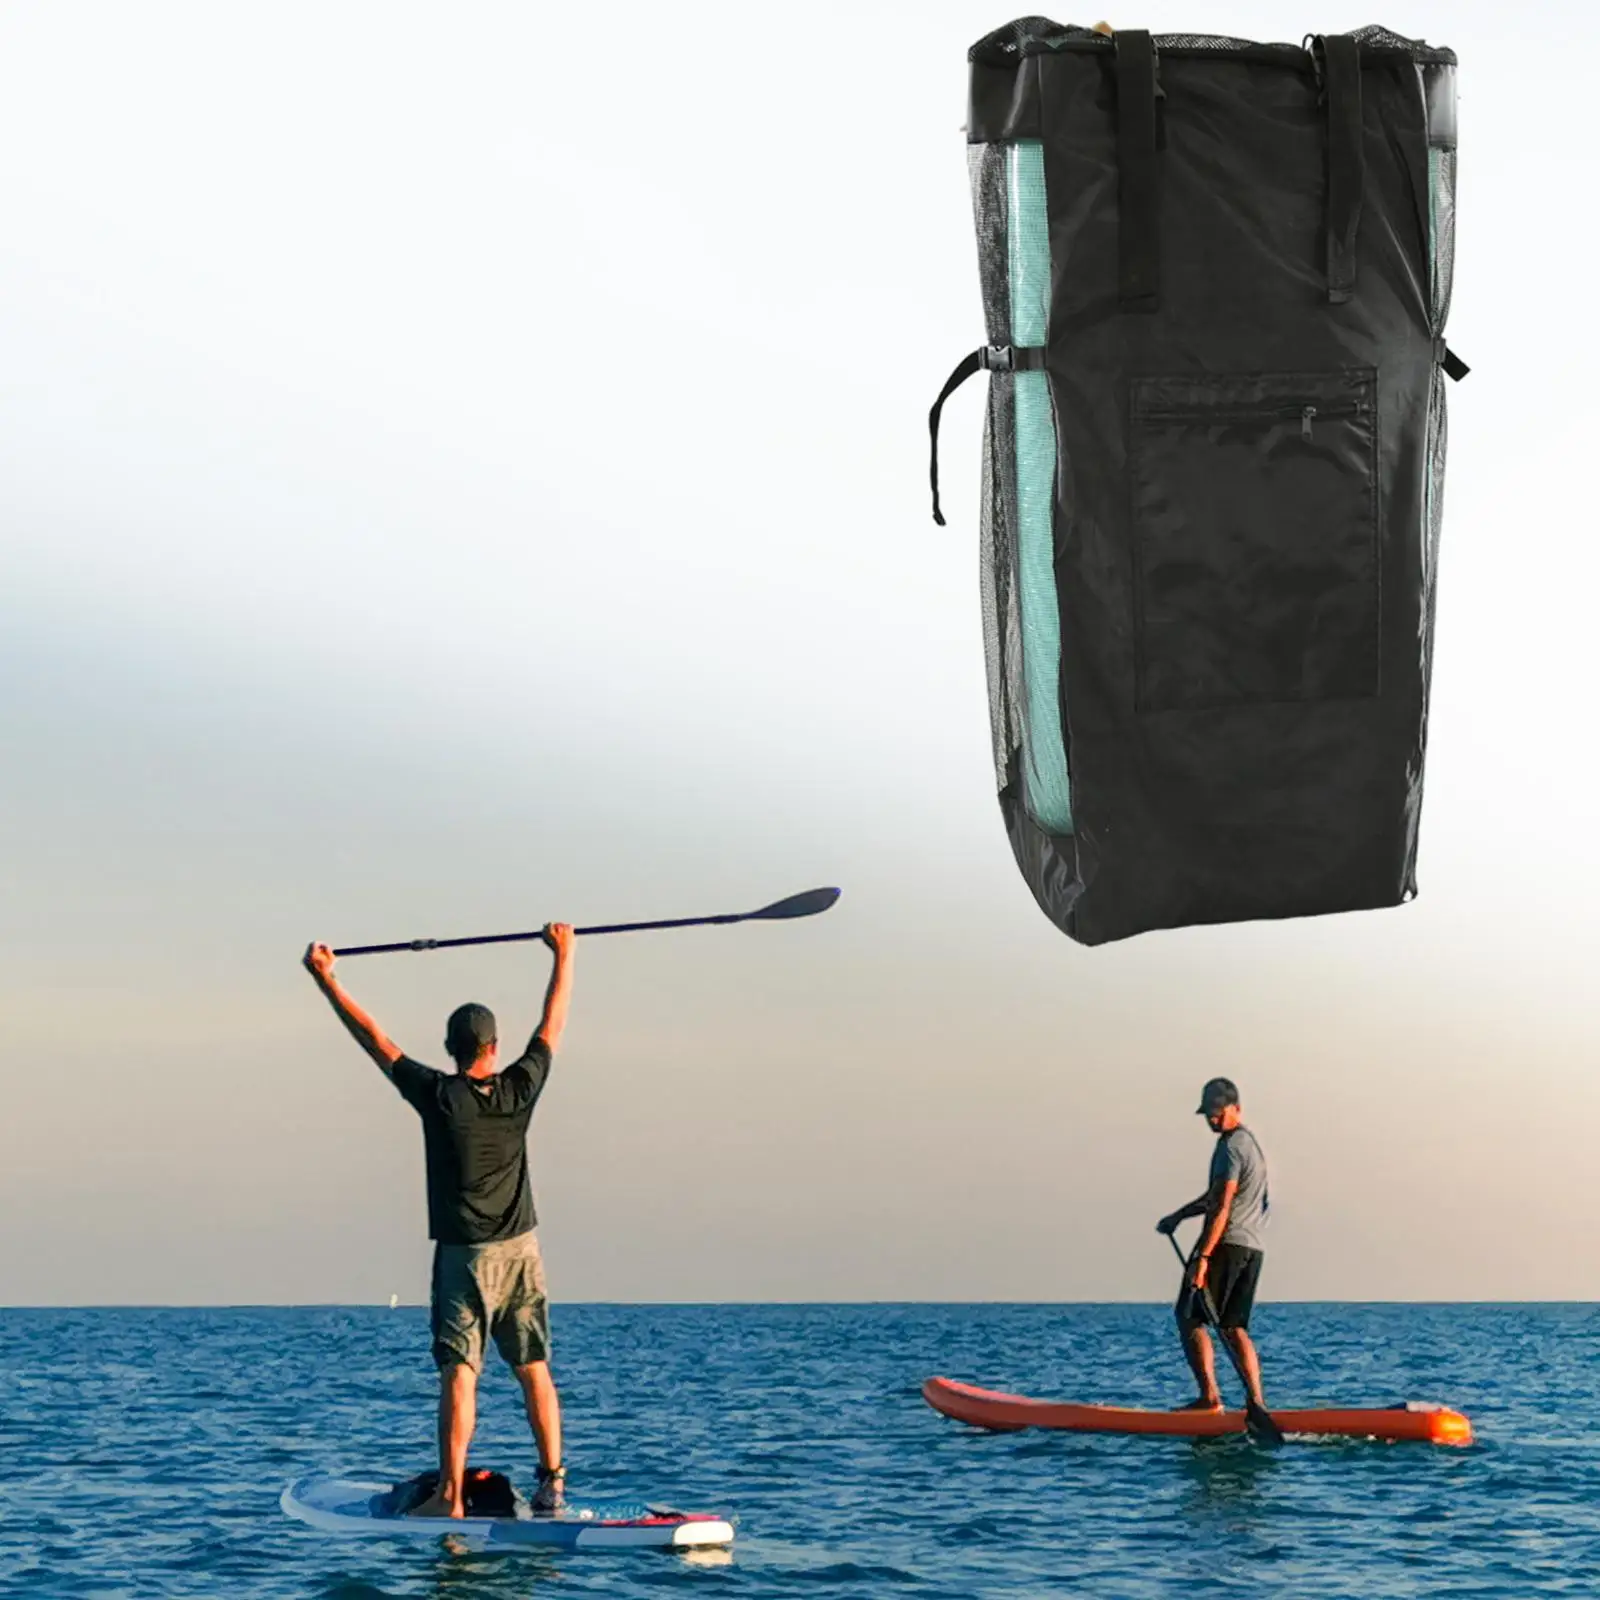 Oxford Cloth Surfboard Travel Bag Surfing Adjustable Straps Waterproof Paddleboard Carry Backpack